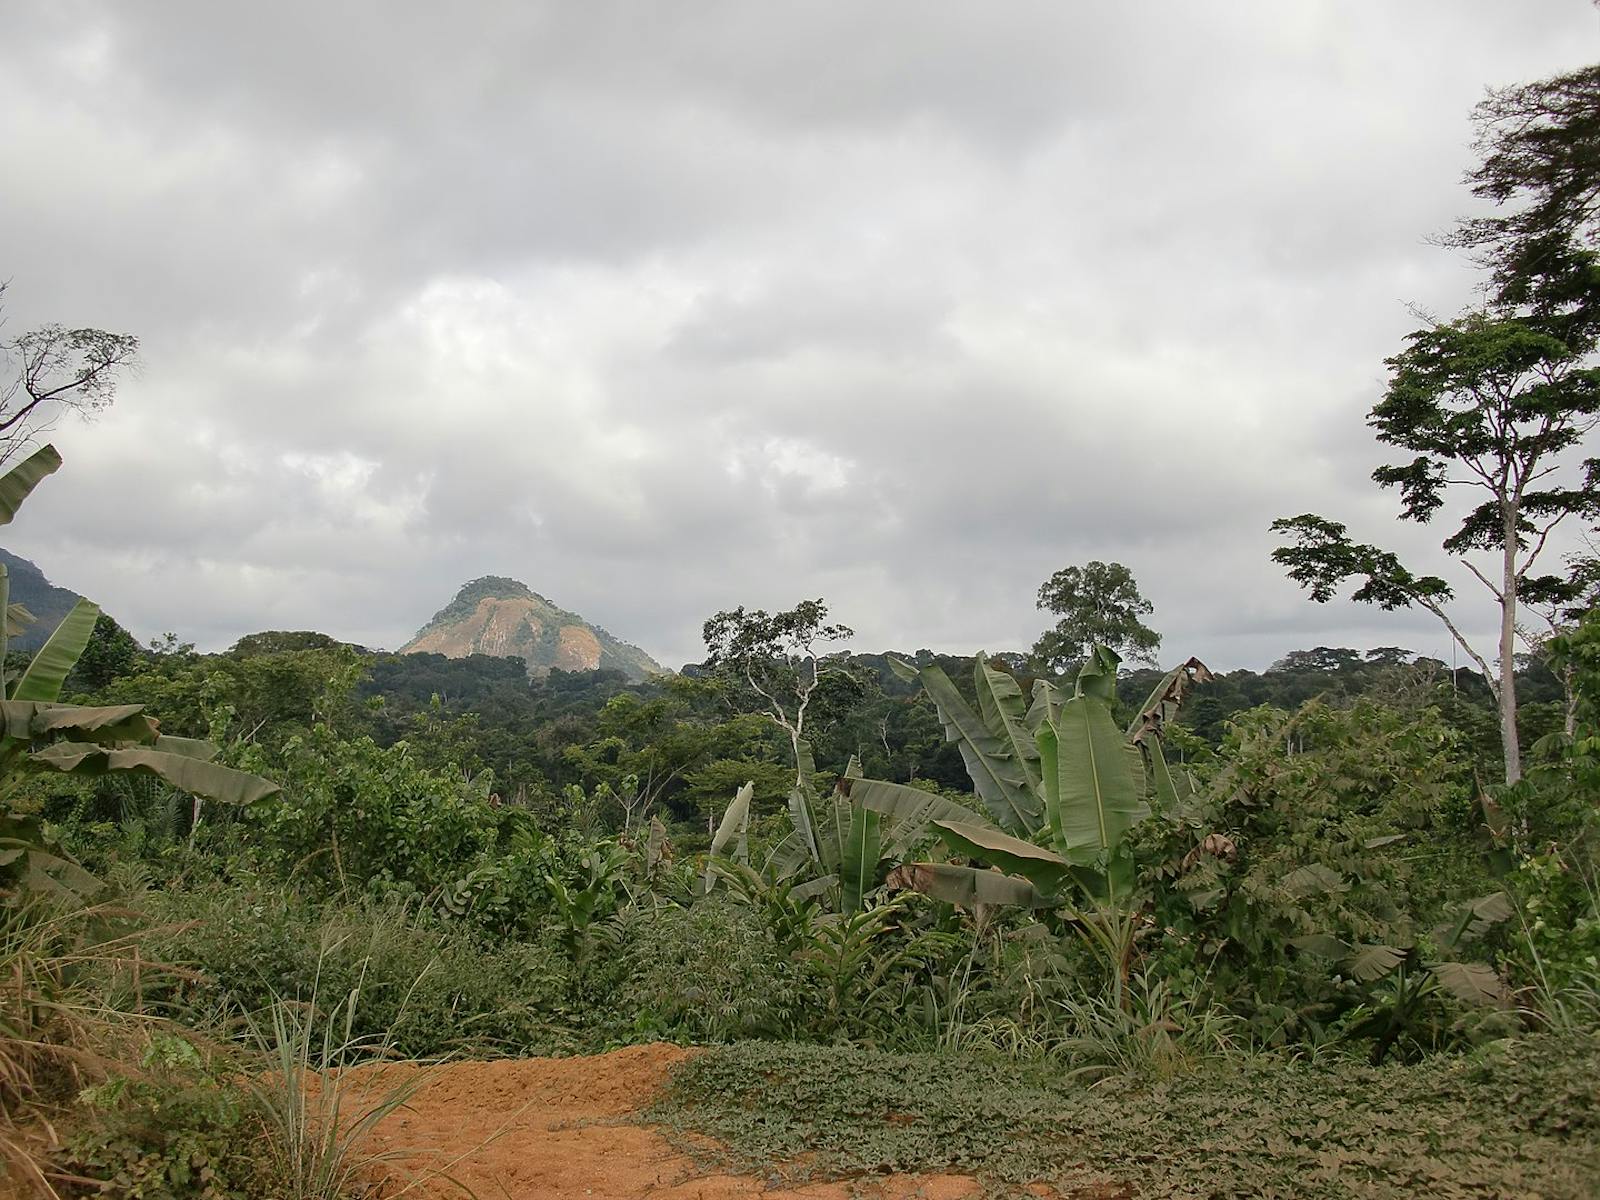 Congolian Coastal Forests